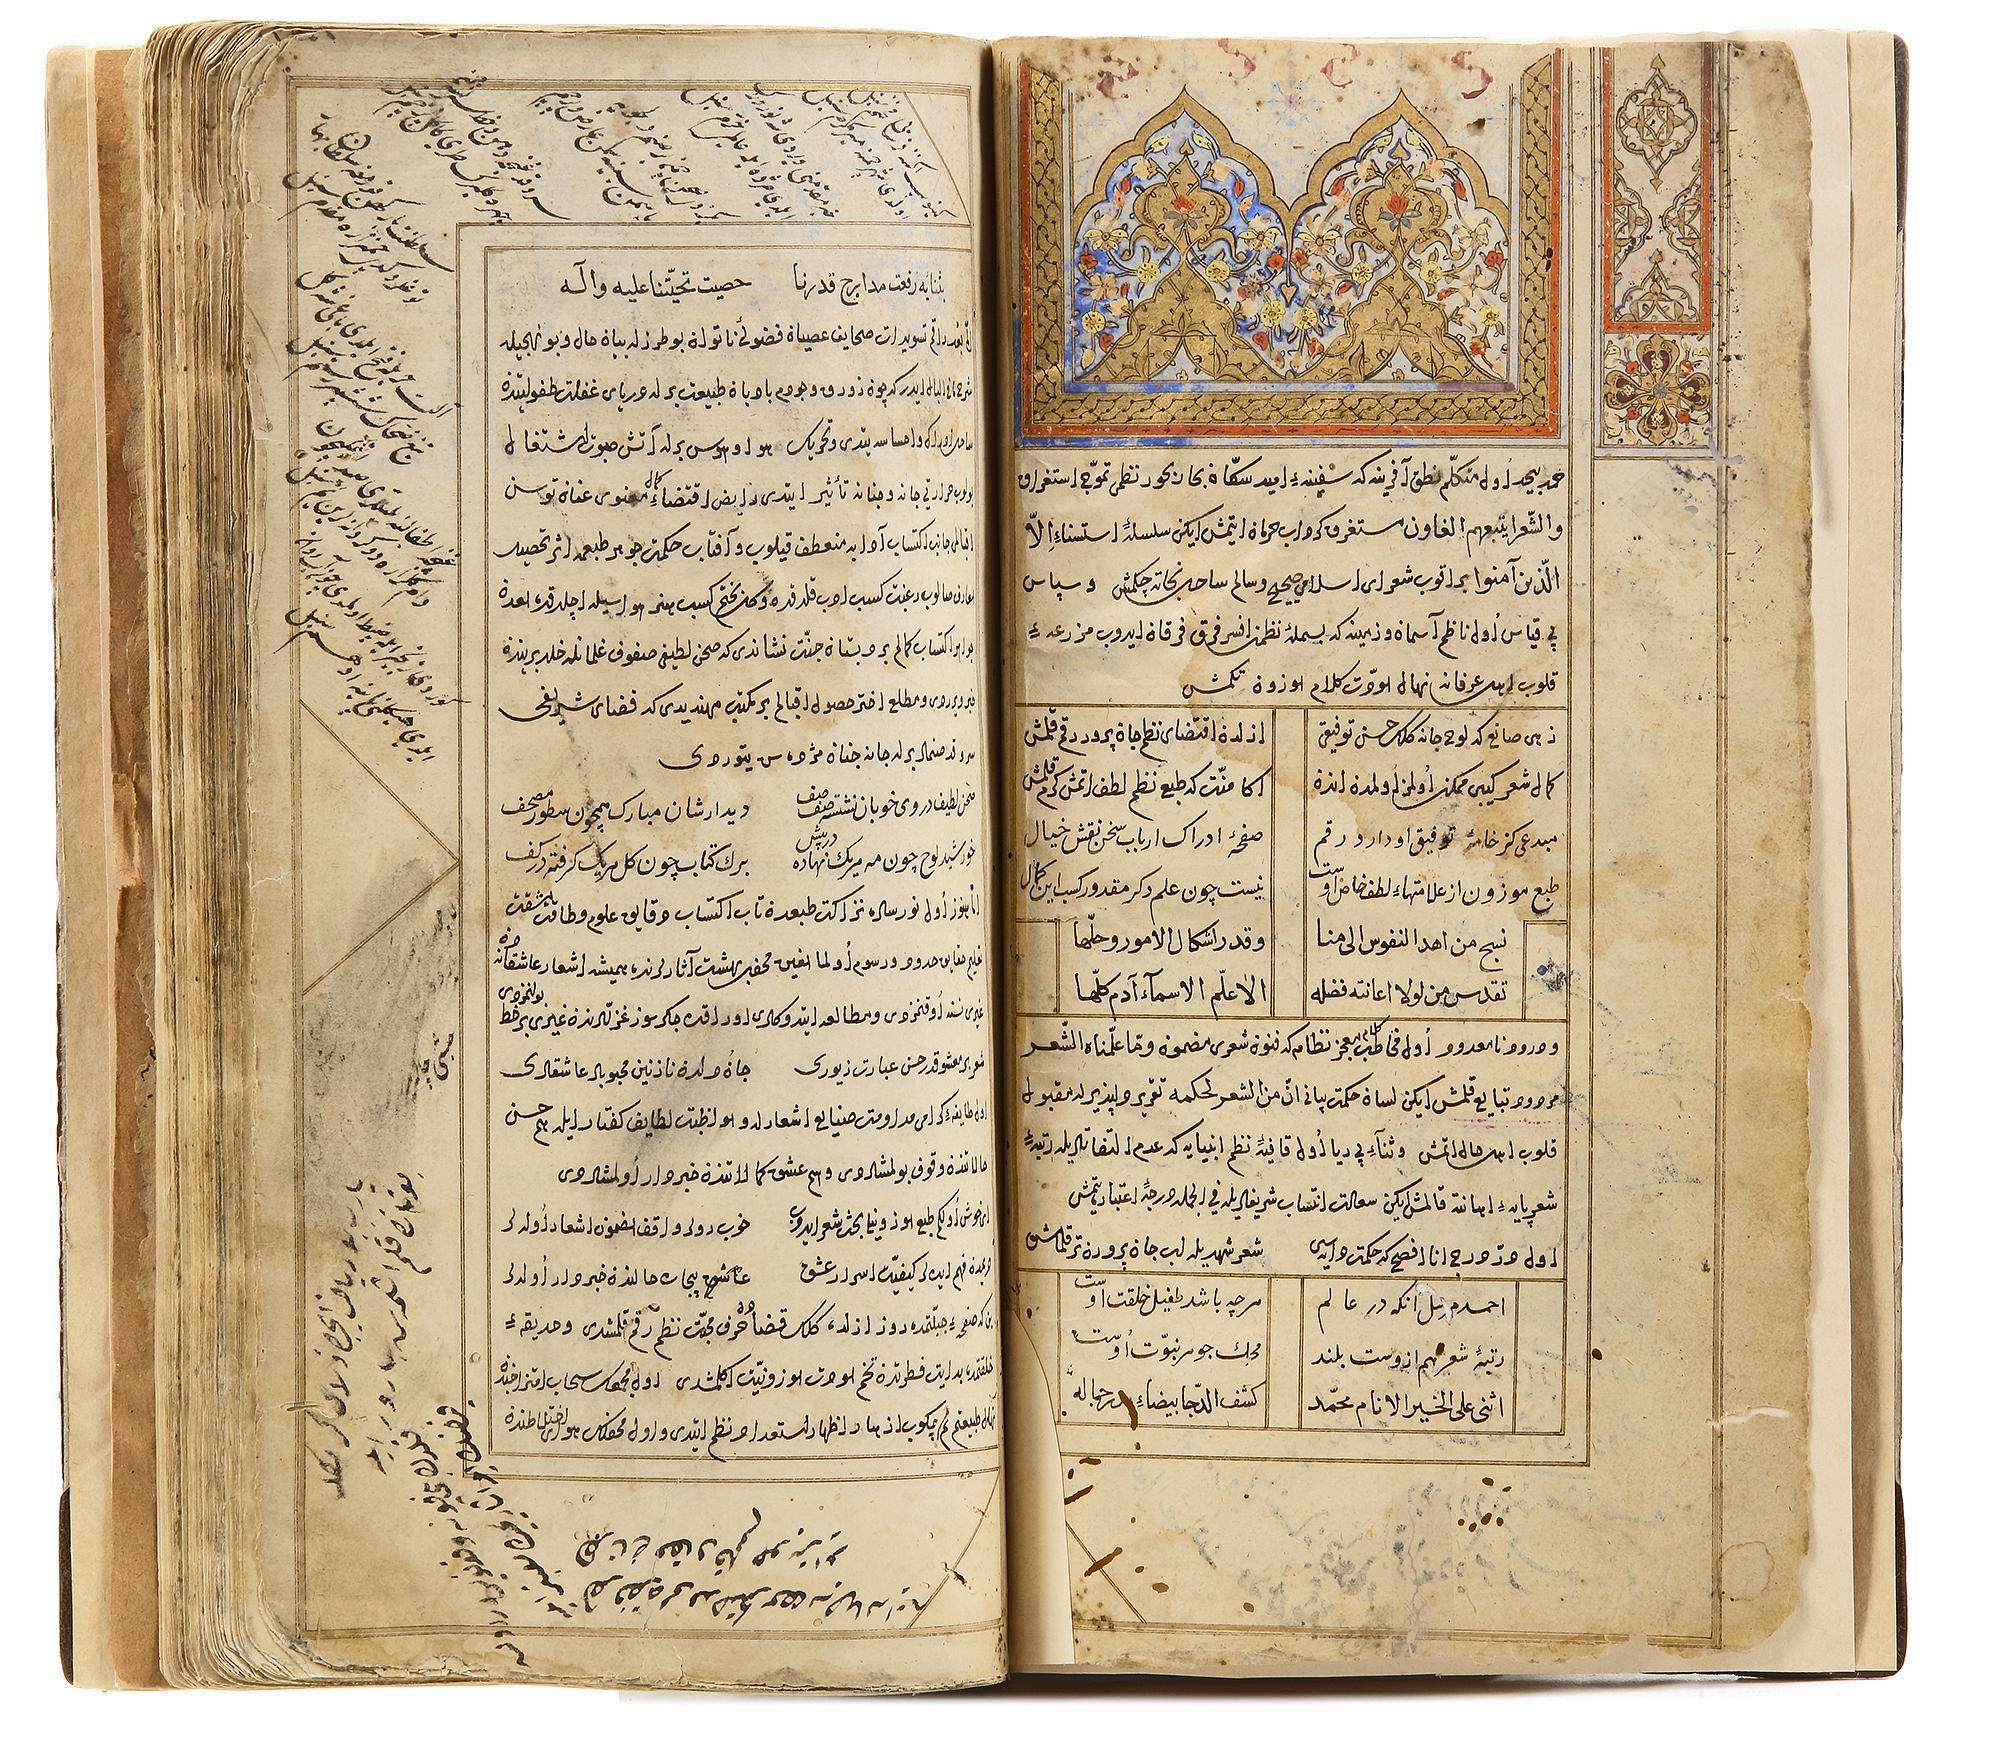 AN OTTOMAN TURKISH POETRY COLLECTION BY FAZULI BAGHDADI, 999 AH/1591 AD,  COPIED AND DATED BY